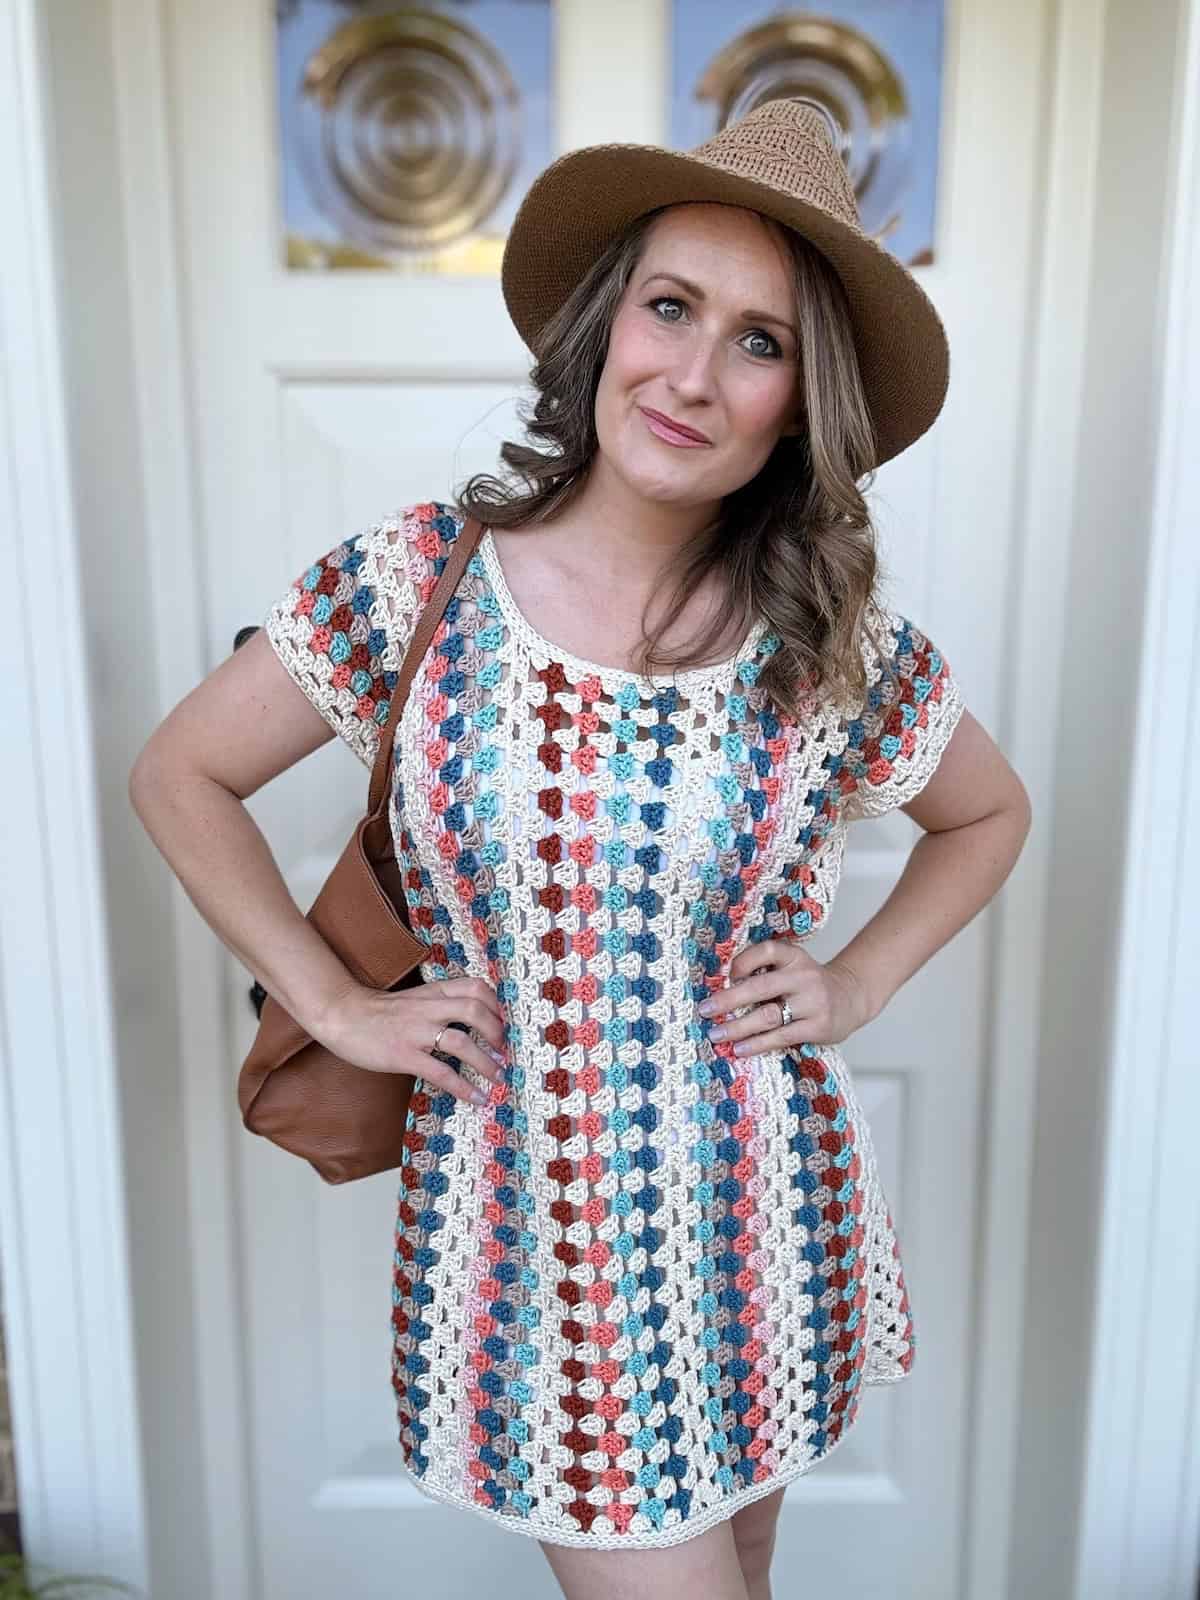 A woman stands in front of a white door, wearing a multicolored crochet dress with short sleeves and a wide-brimmed hat. She is looking at the camera with her hands on her hips and a brown purse over her shoulder.